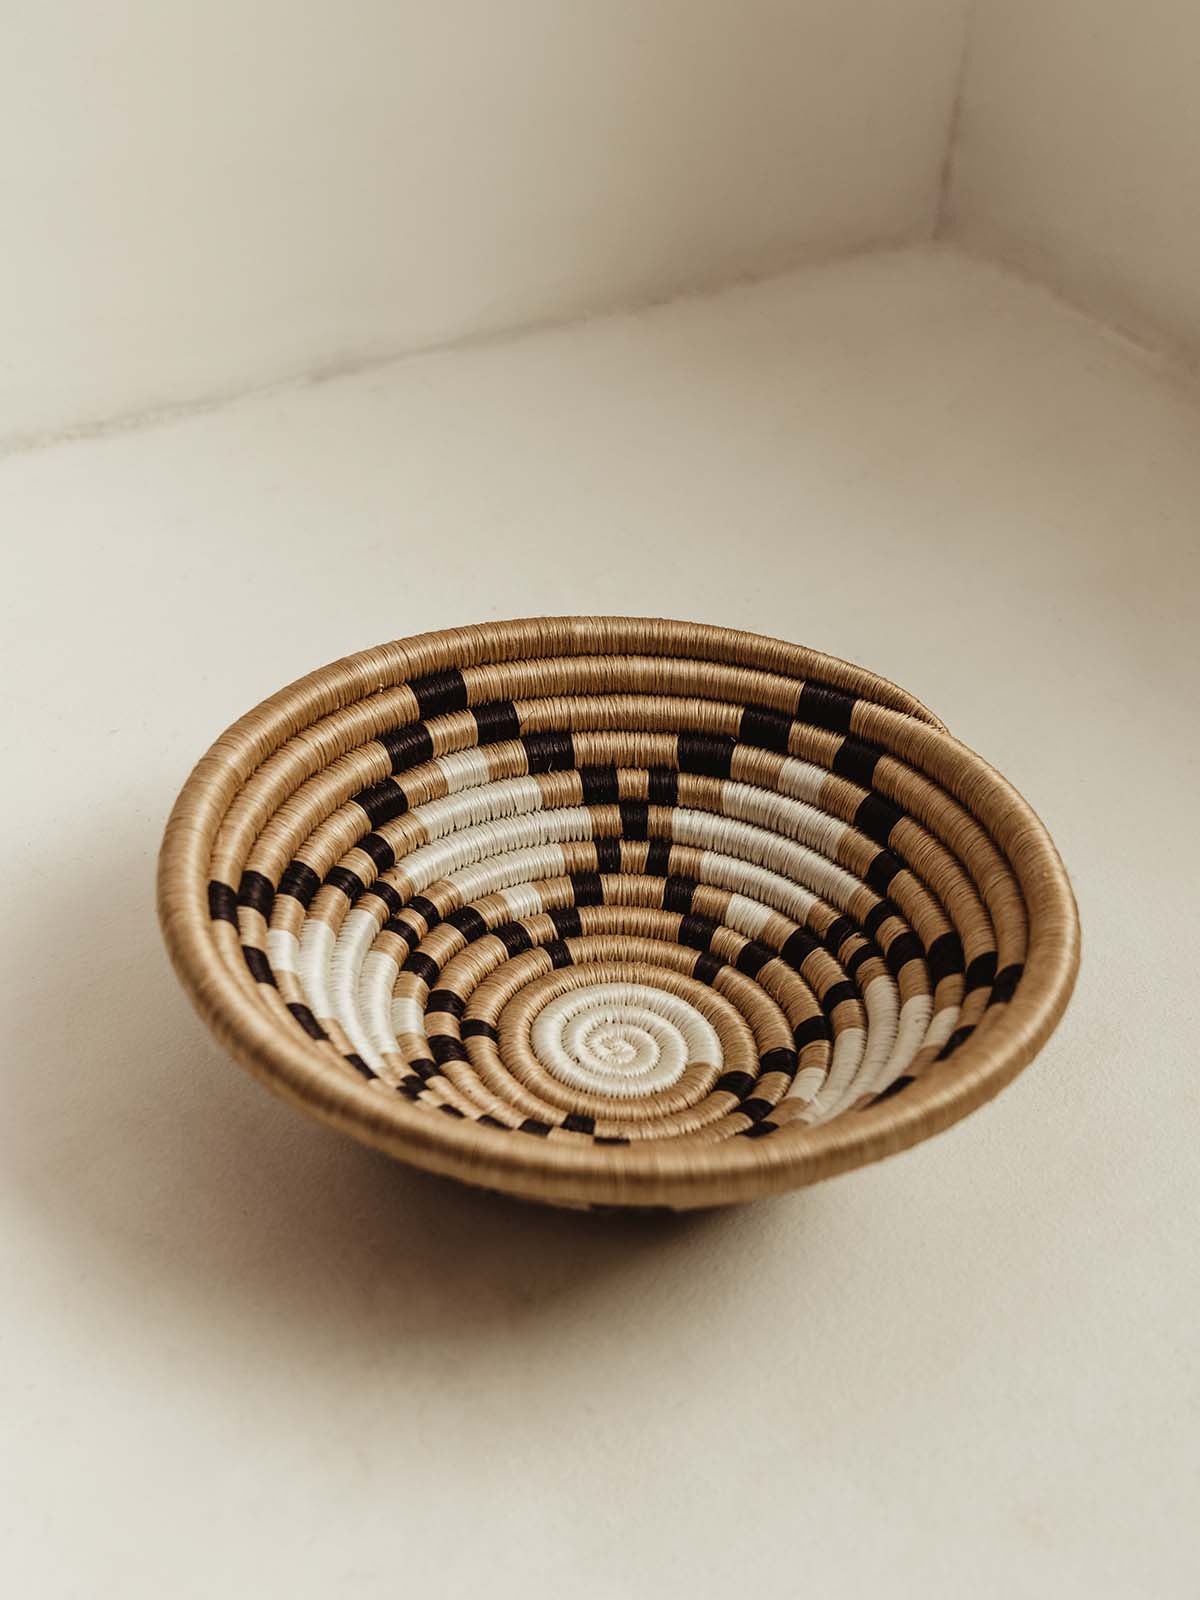 Small Woven bowl on cream surface. Tan with black and white diamond patterns